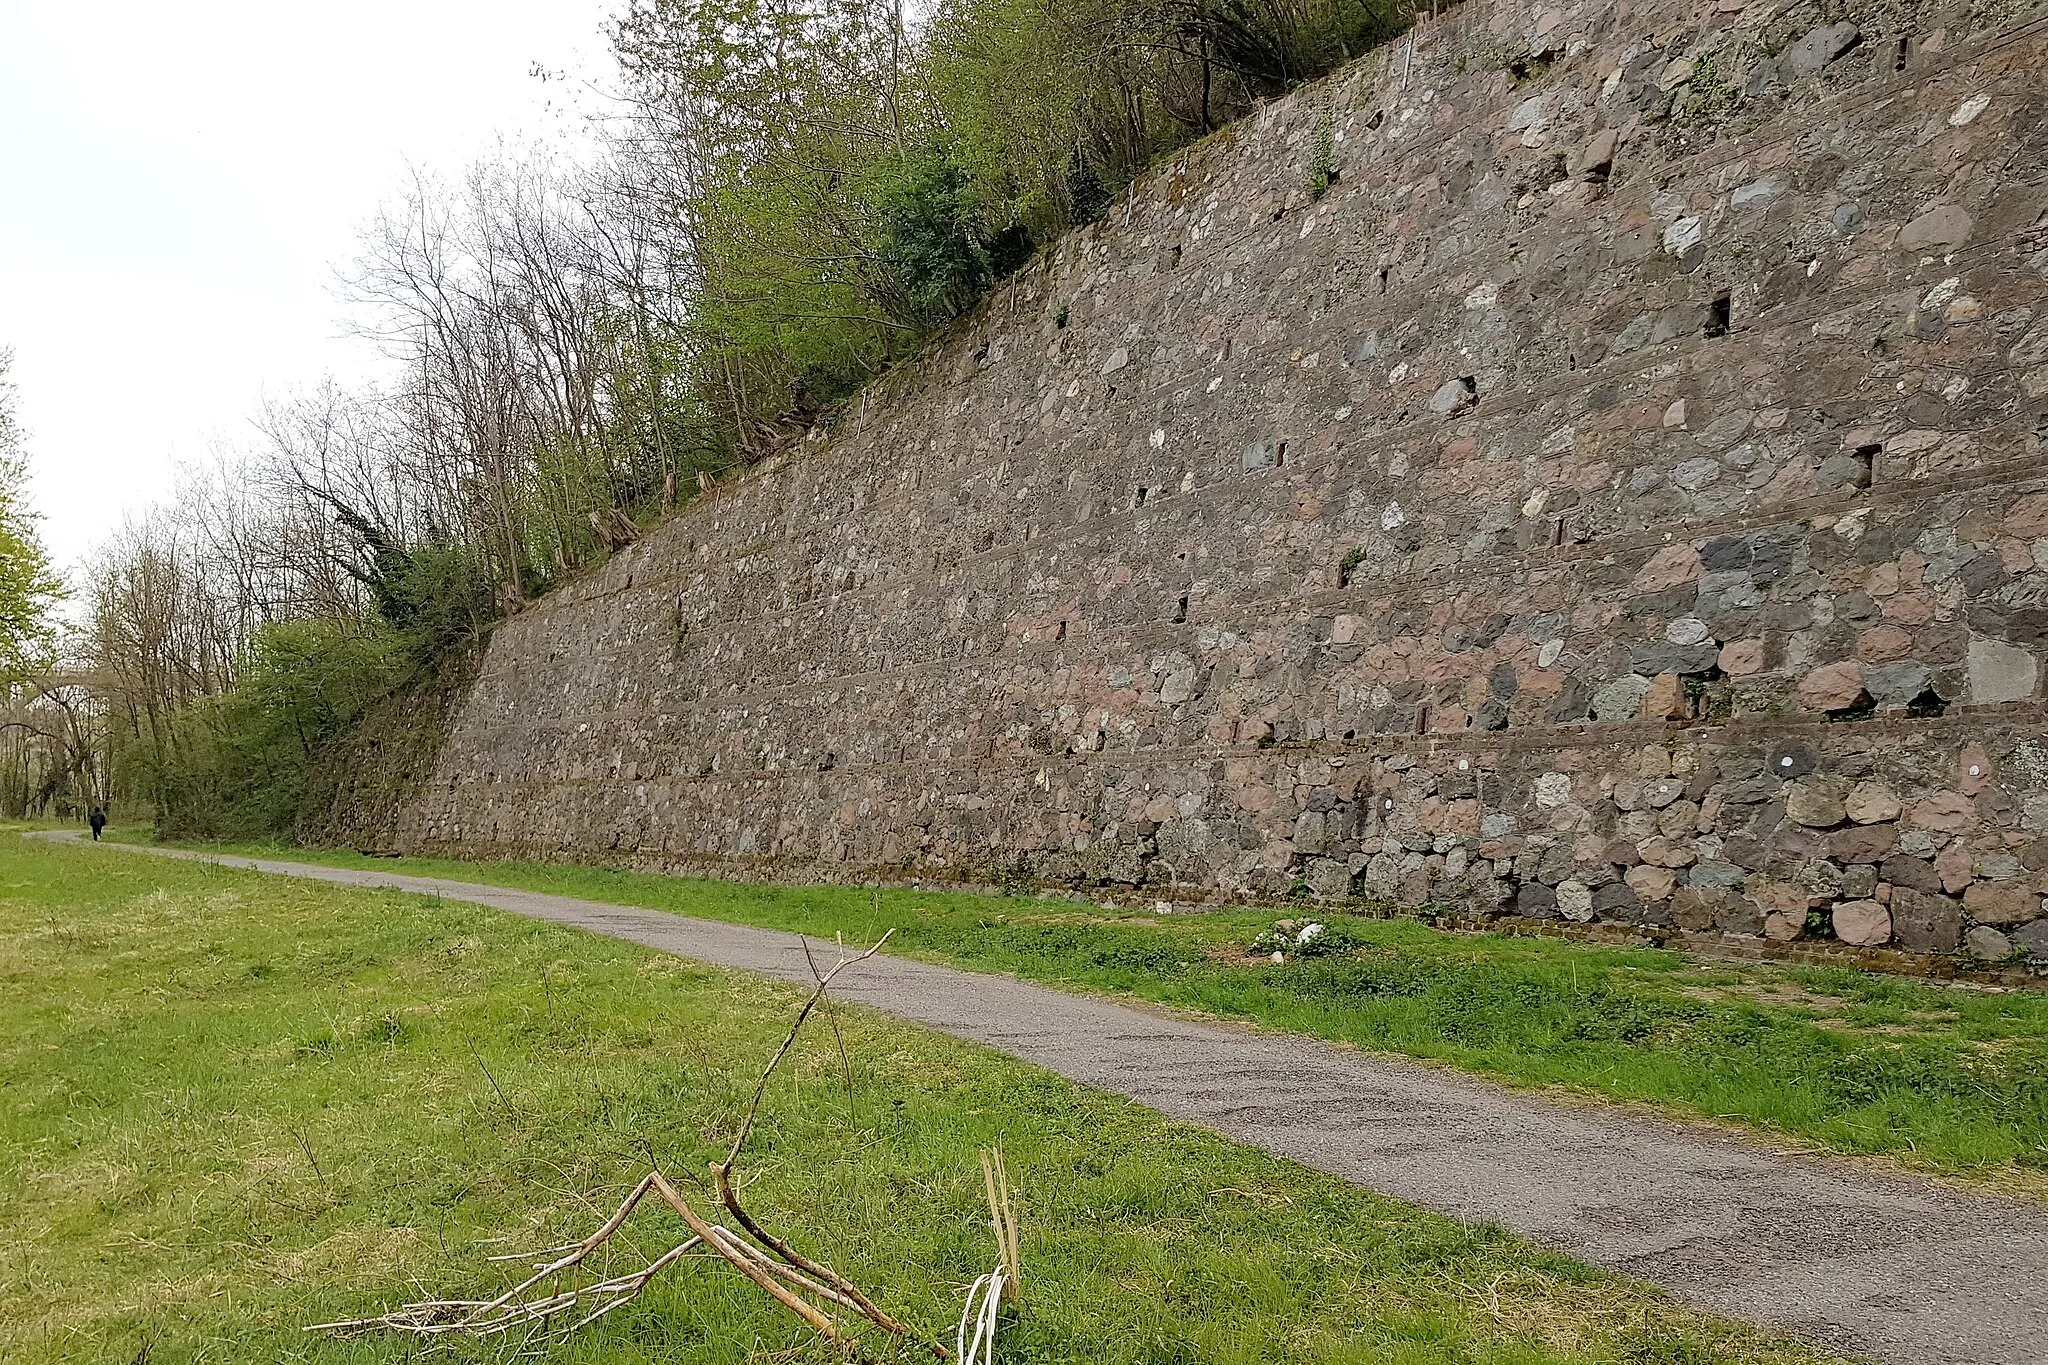 Photo showing: Rock climbing crag made on a containment wall placed next to the river Olona and the ex railway "Ferrovia Valmorea". The wall has spit and top chains and the rock is made of red bricks and porphyry stones. The gravel road in the foreground is the cycleway "pista ciclabile Valle Olona". This wall is located in the municipality of Cairate in the province of Varese in the region Lombardy in northen Italy. Picture taken on the 19th of April in 2021.  2021-04-19